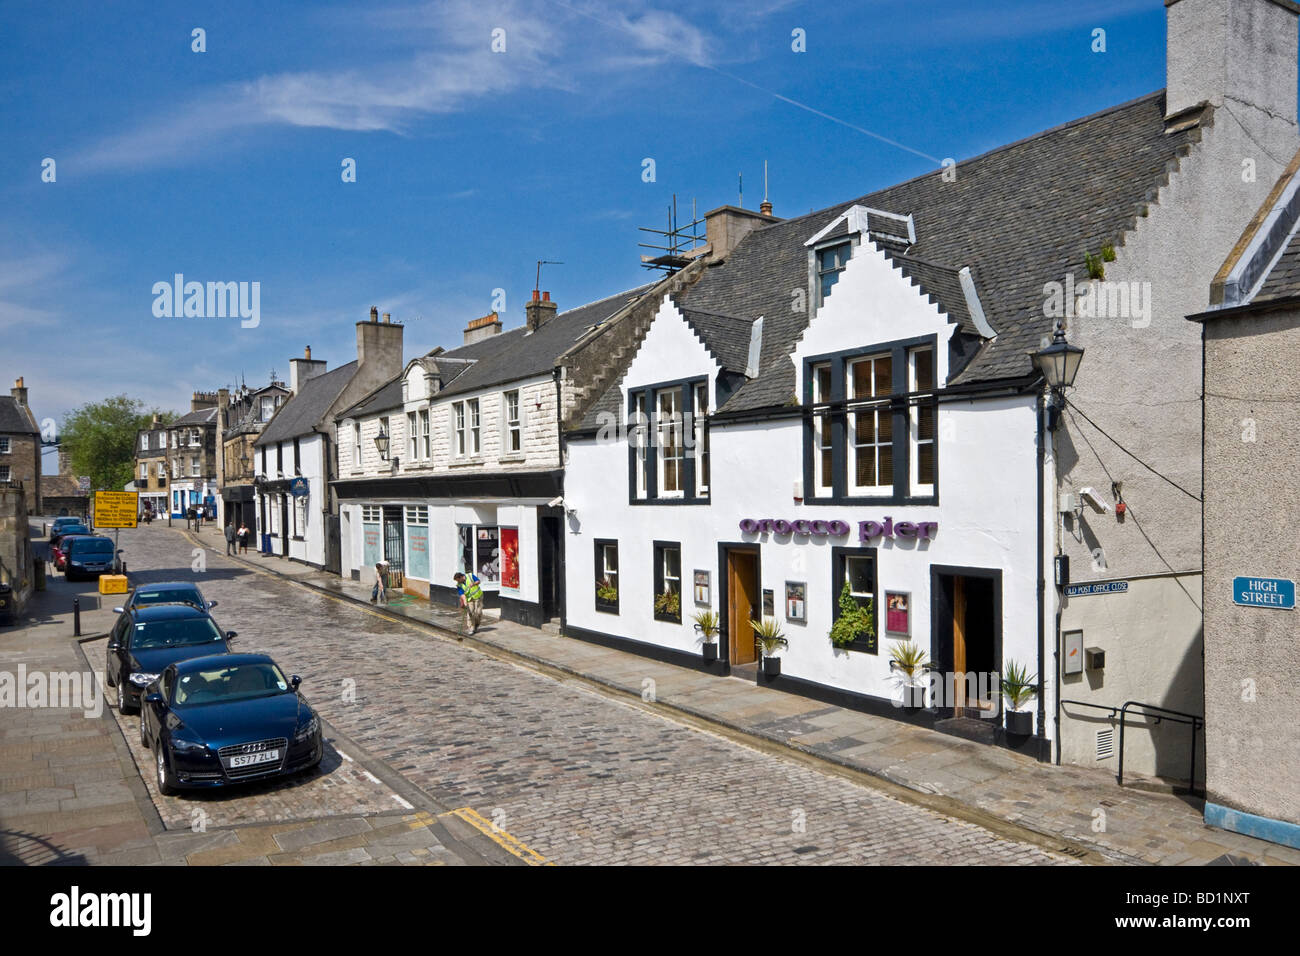 High Street in South Queensferry Lothians Scotland with eating places and shops Stock Photo